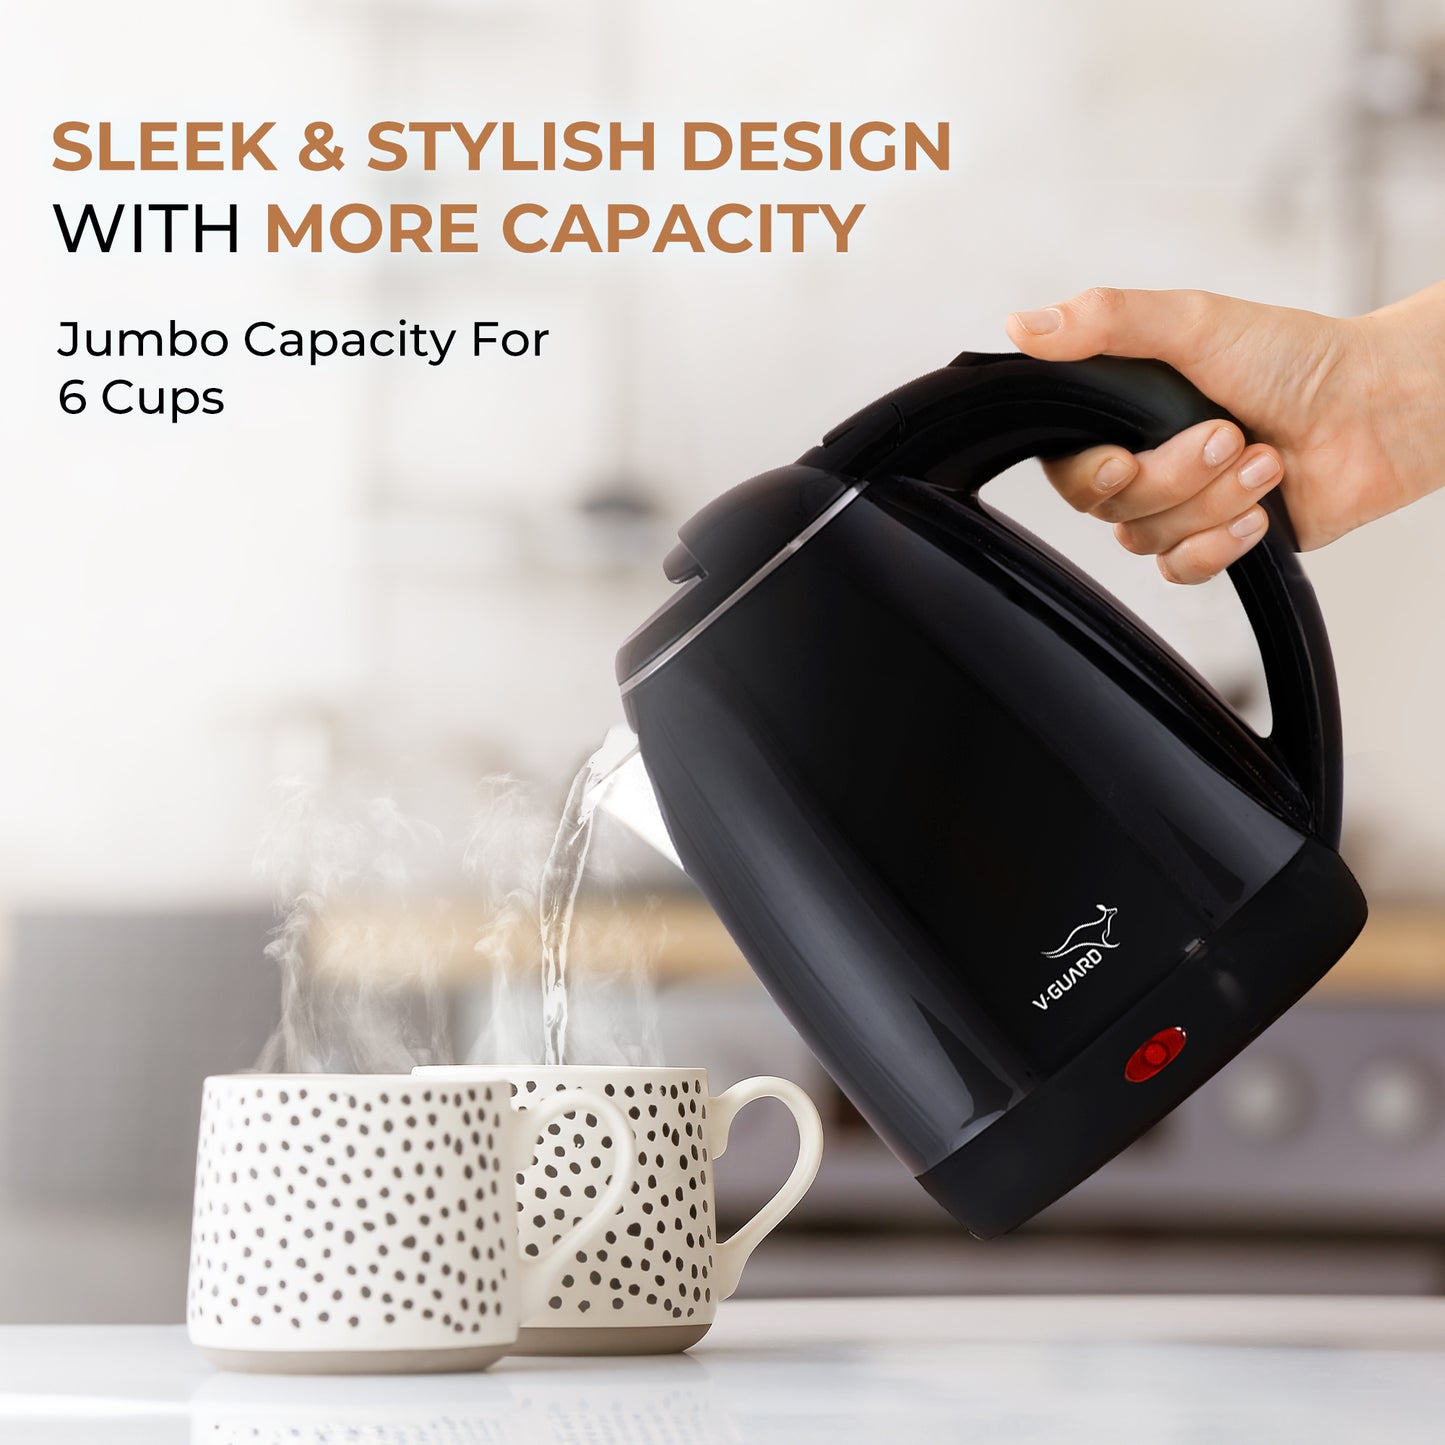 VKP15 Prime 1.5 Litre Electric Kettle for hot water | Double Wall with Cool Touch Body | 2 year warranty |1500 Watt